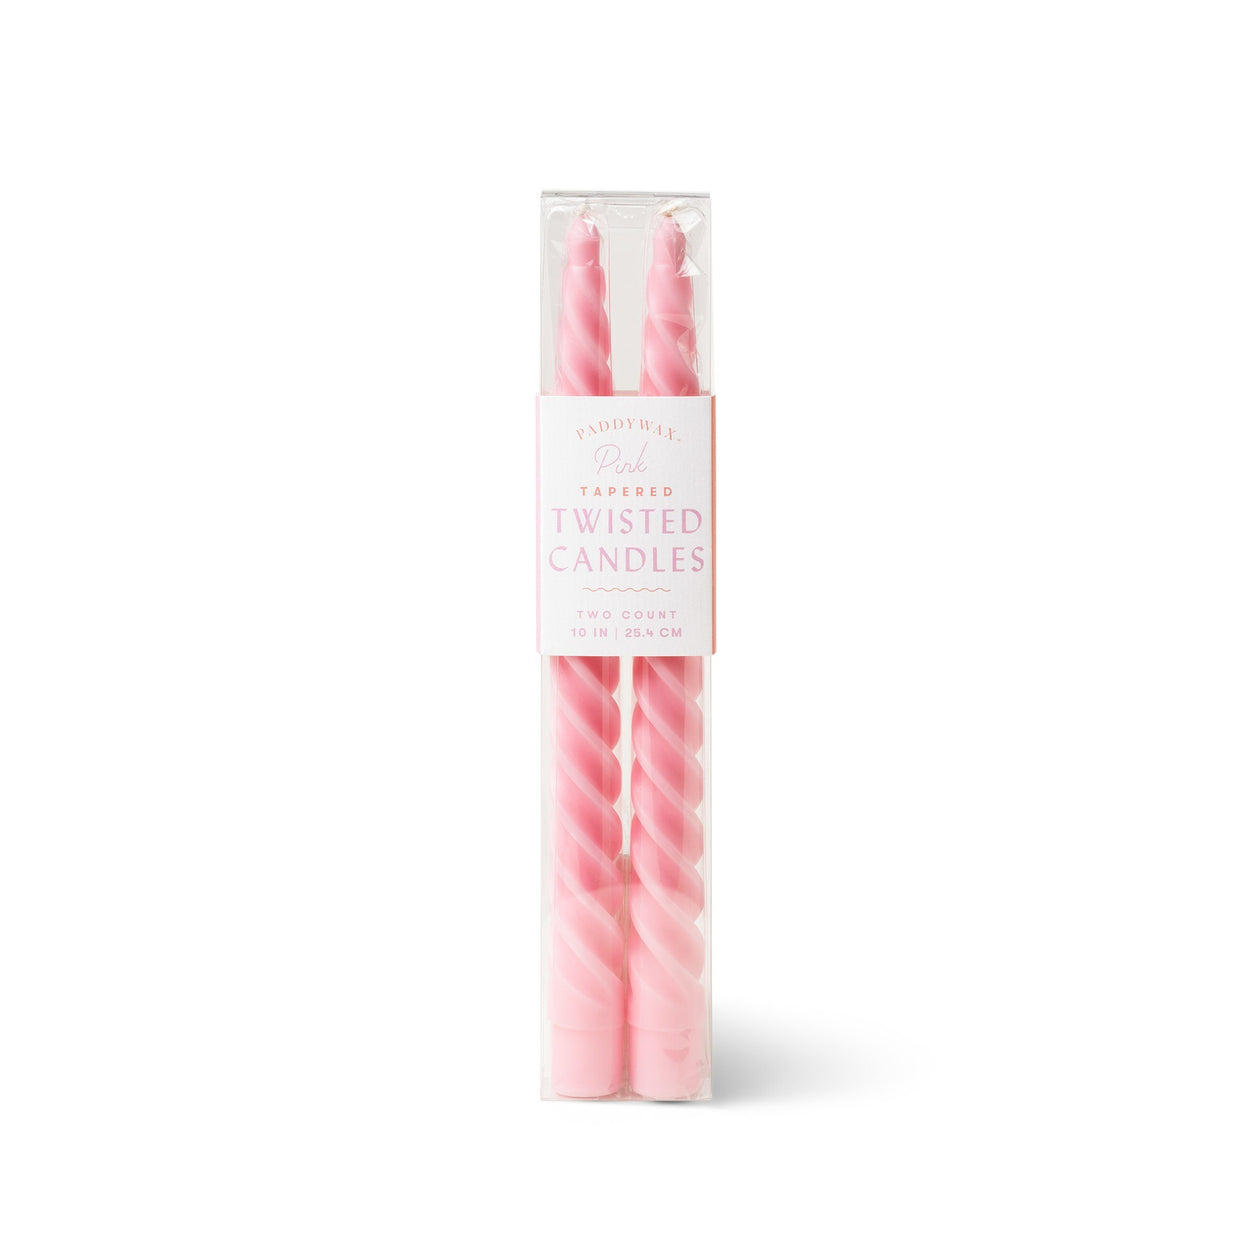 Paddywax Pink Twisted Taper Candles